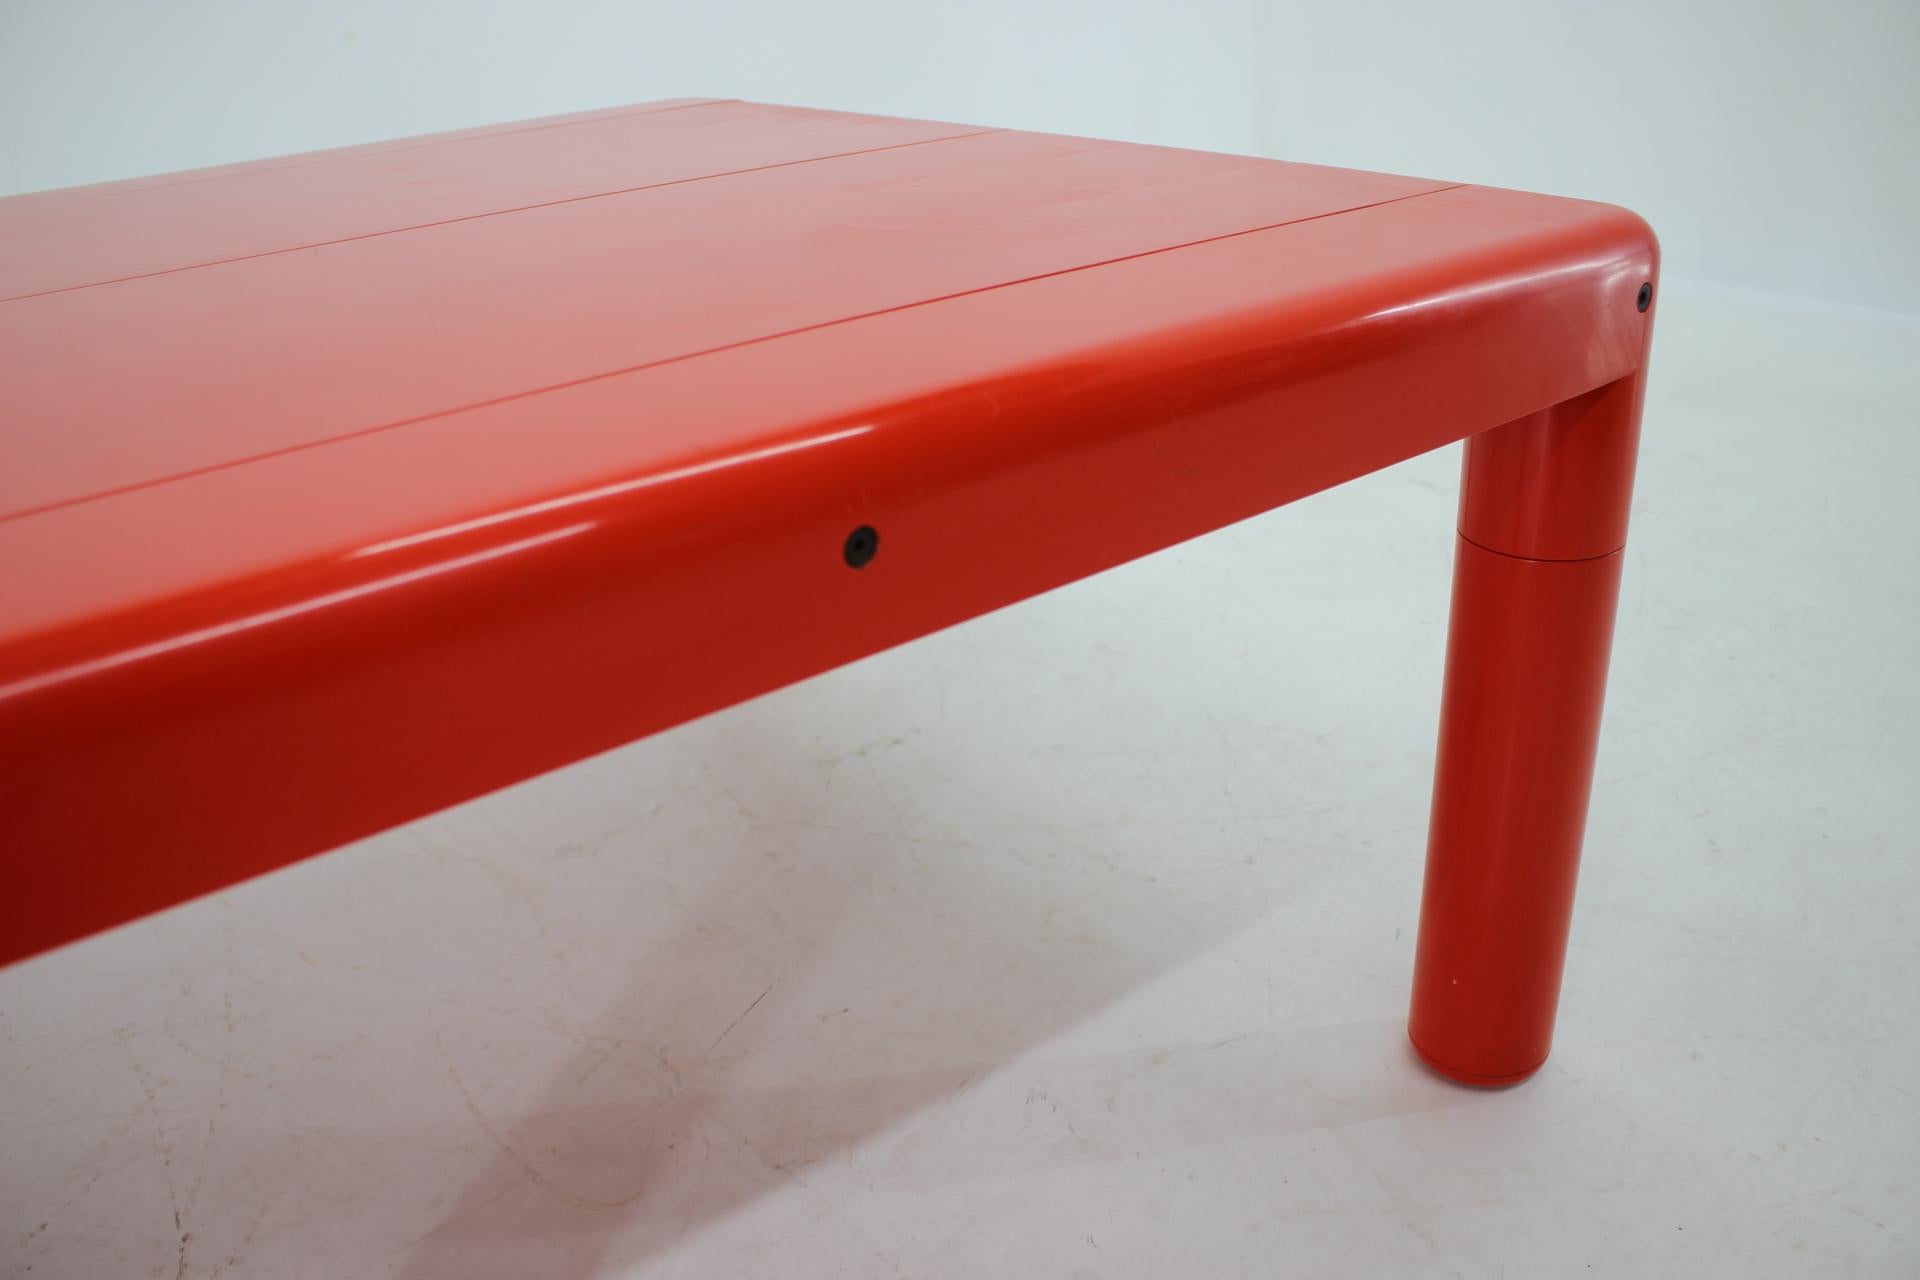 Midcentury Space Age Coffee Table UPO, Eero Aarnio, Finland, 1970s For Sale 1